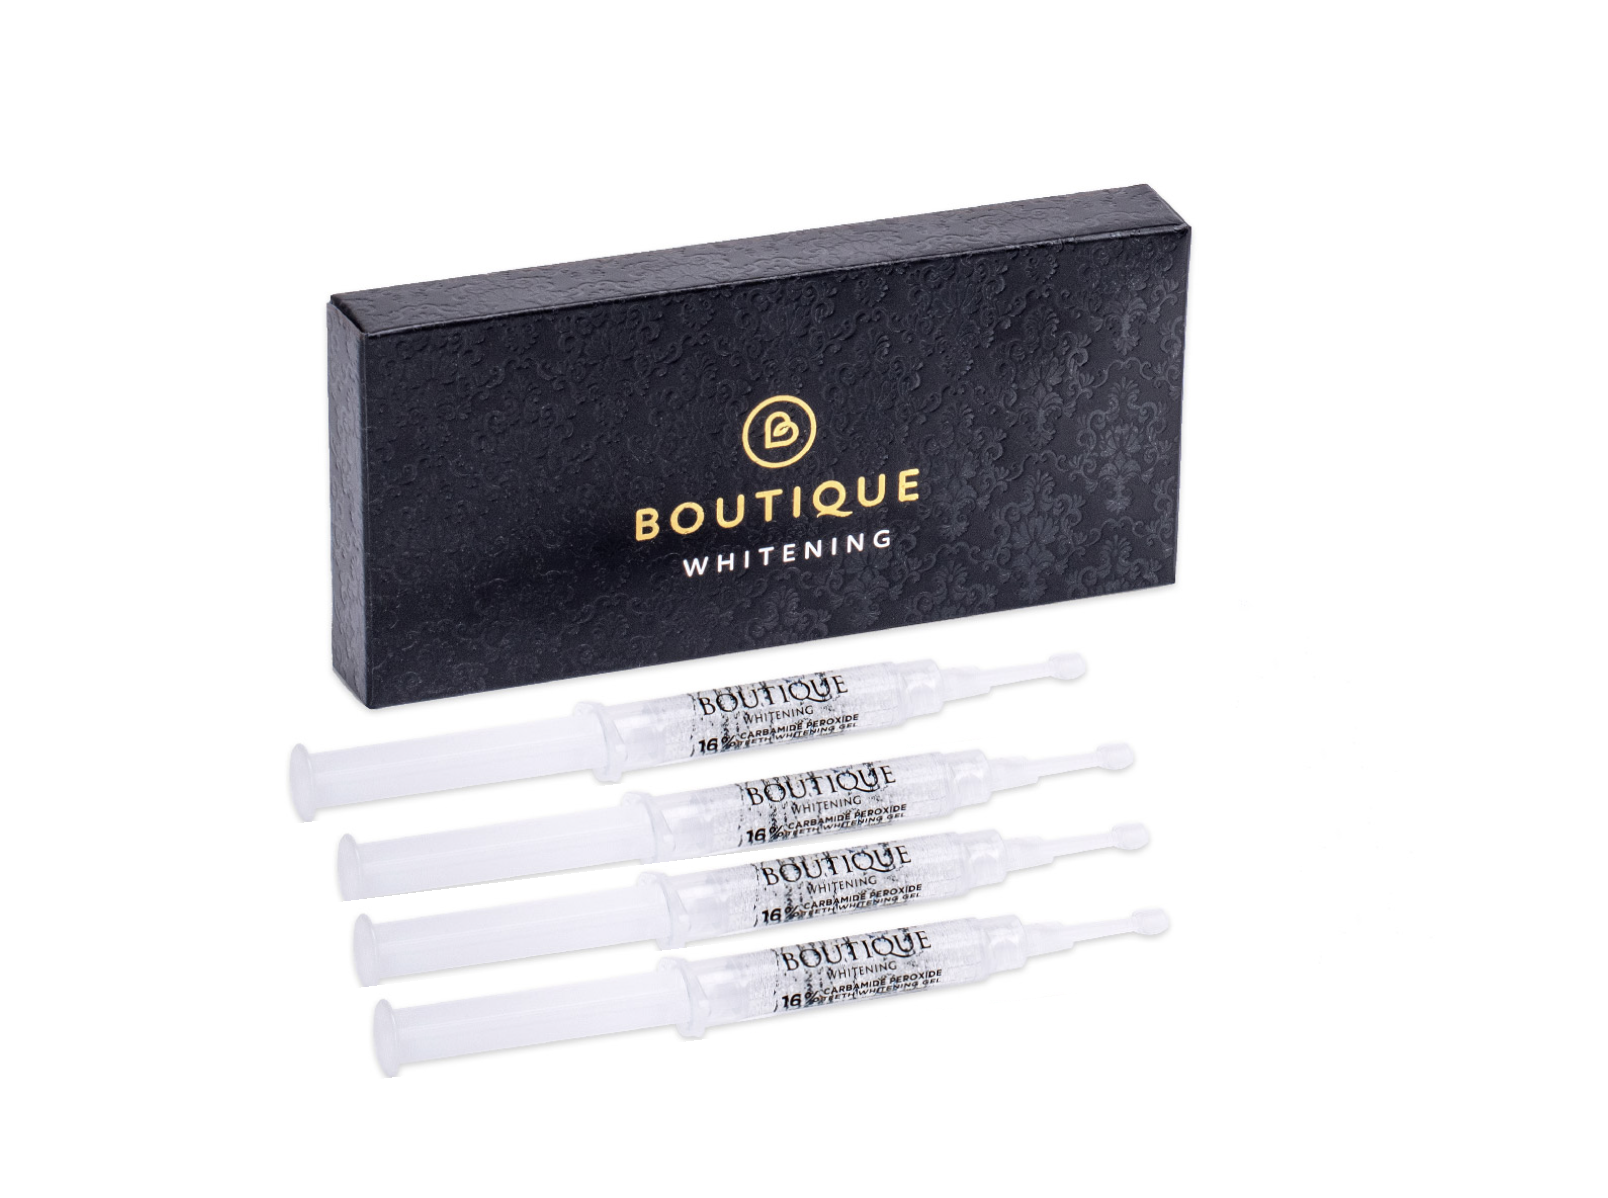 Four Syringe of Boutique Tooth Whitening Gel (£ 50.00)